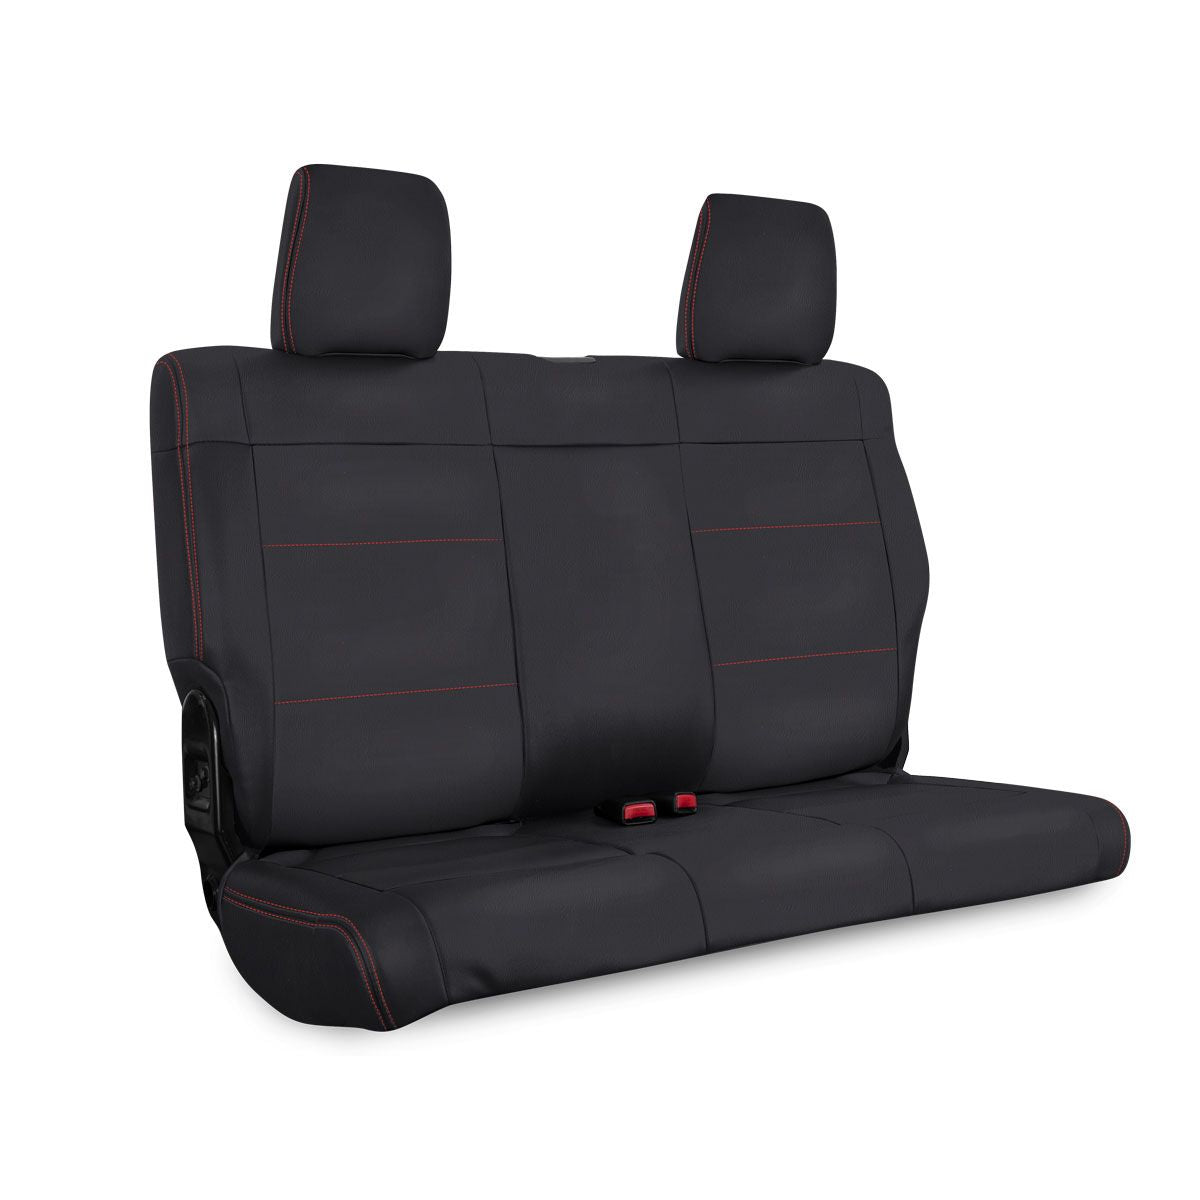 PRP 07 Jeep Wrangler JKU Rear Seat Cover/4 door - Black with Red Stitching